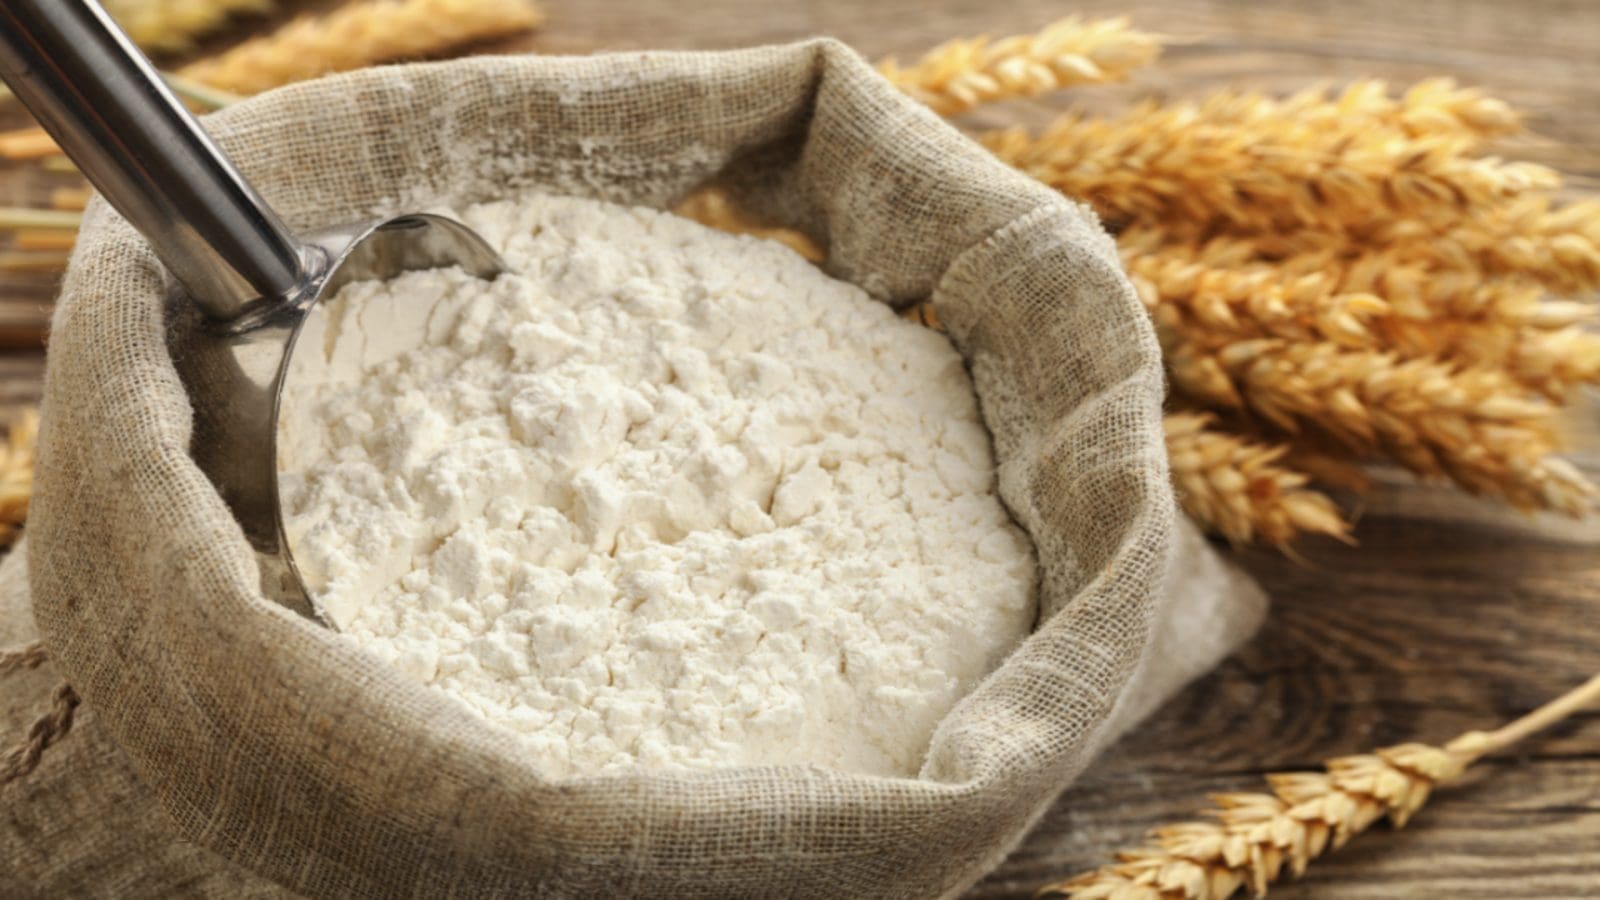 Global flour trade to drop in 2022 following decreased outlooks in the world’s top wheat importers